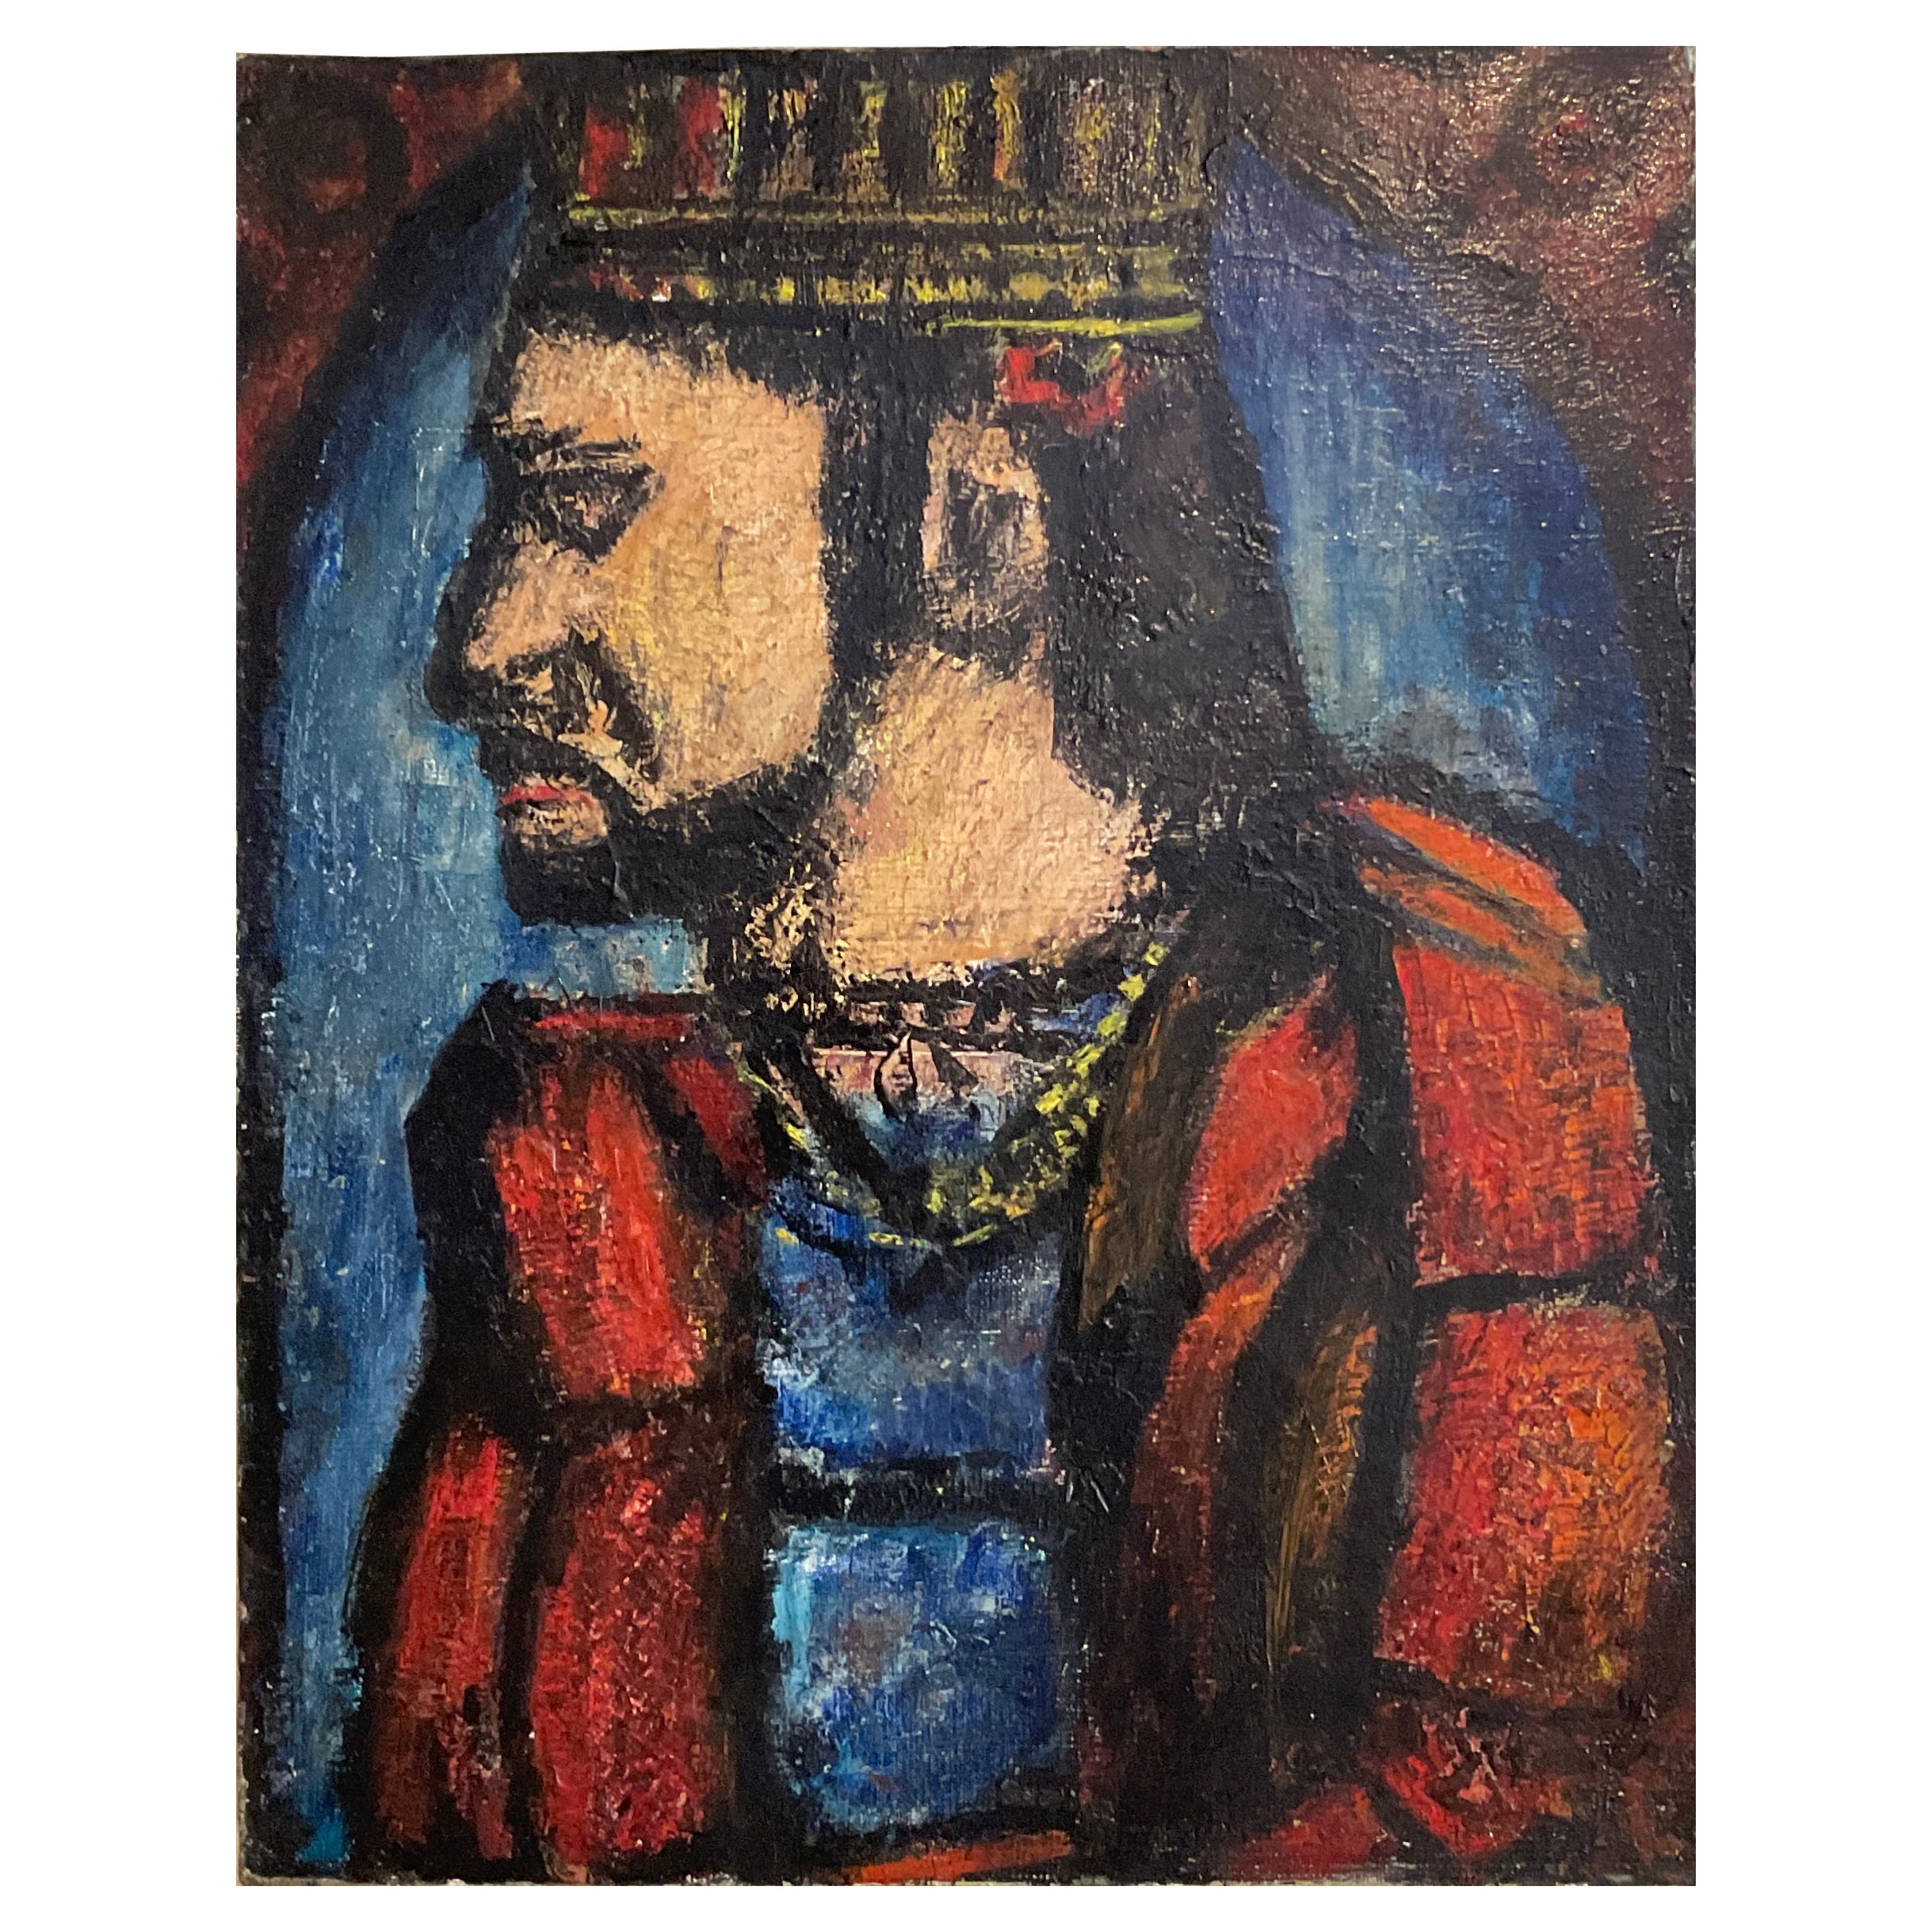 'after' Georges Rouault "Le Vieux Roi or the Old King" Oil on Canvas Painting